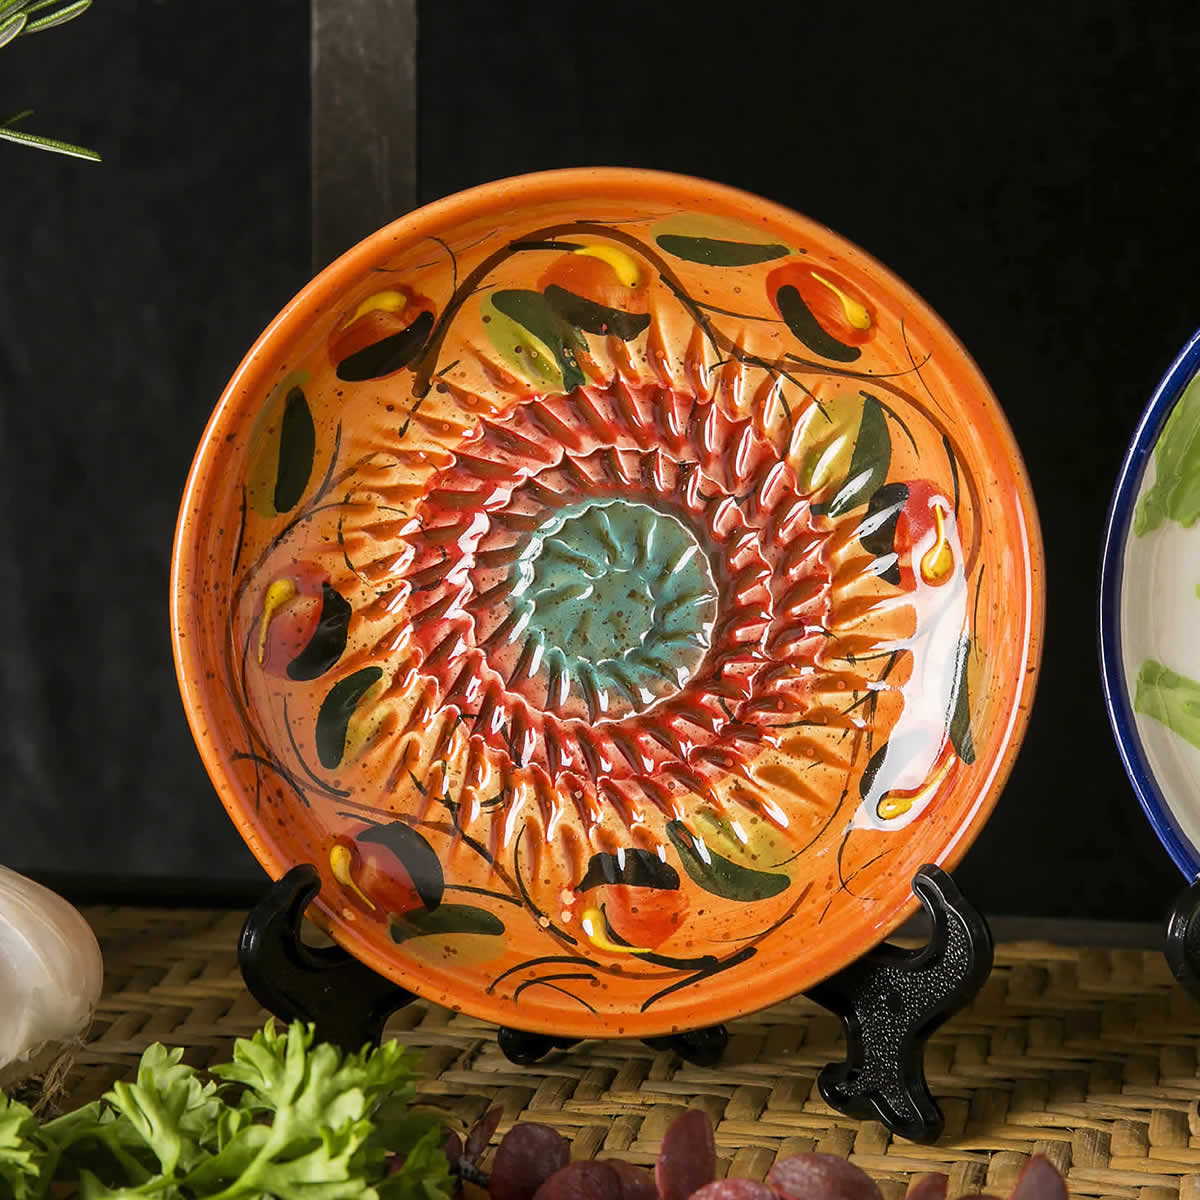 Spain Scroll. Lime Green Plate with Rainbow Circles #Ref 15 Garlic Grater Plate. Handmade and Hand Painted in Cordoba